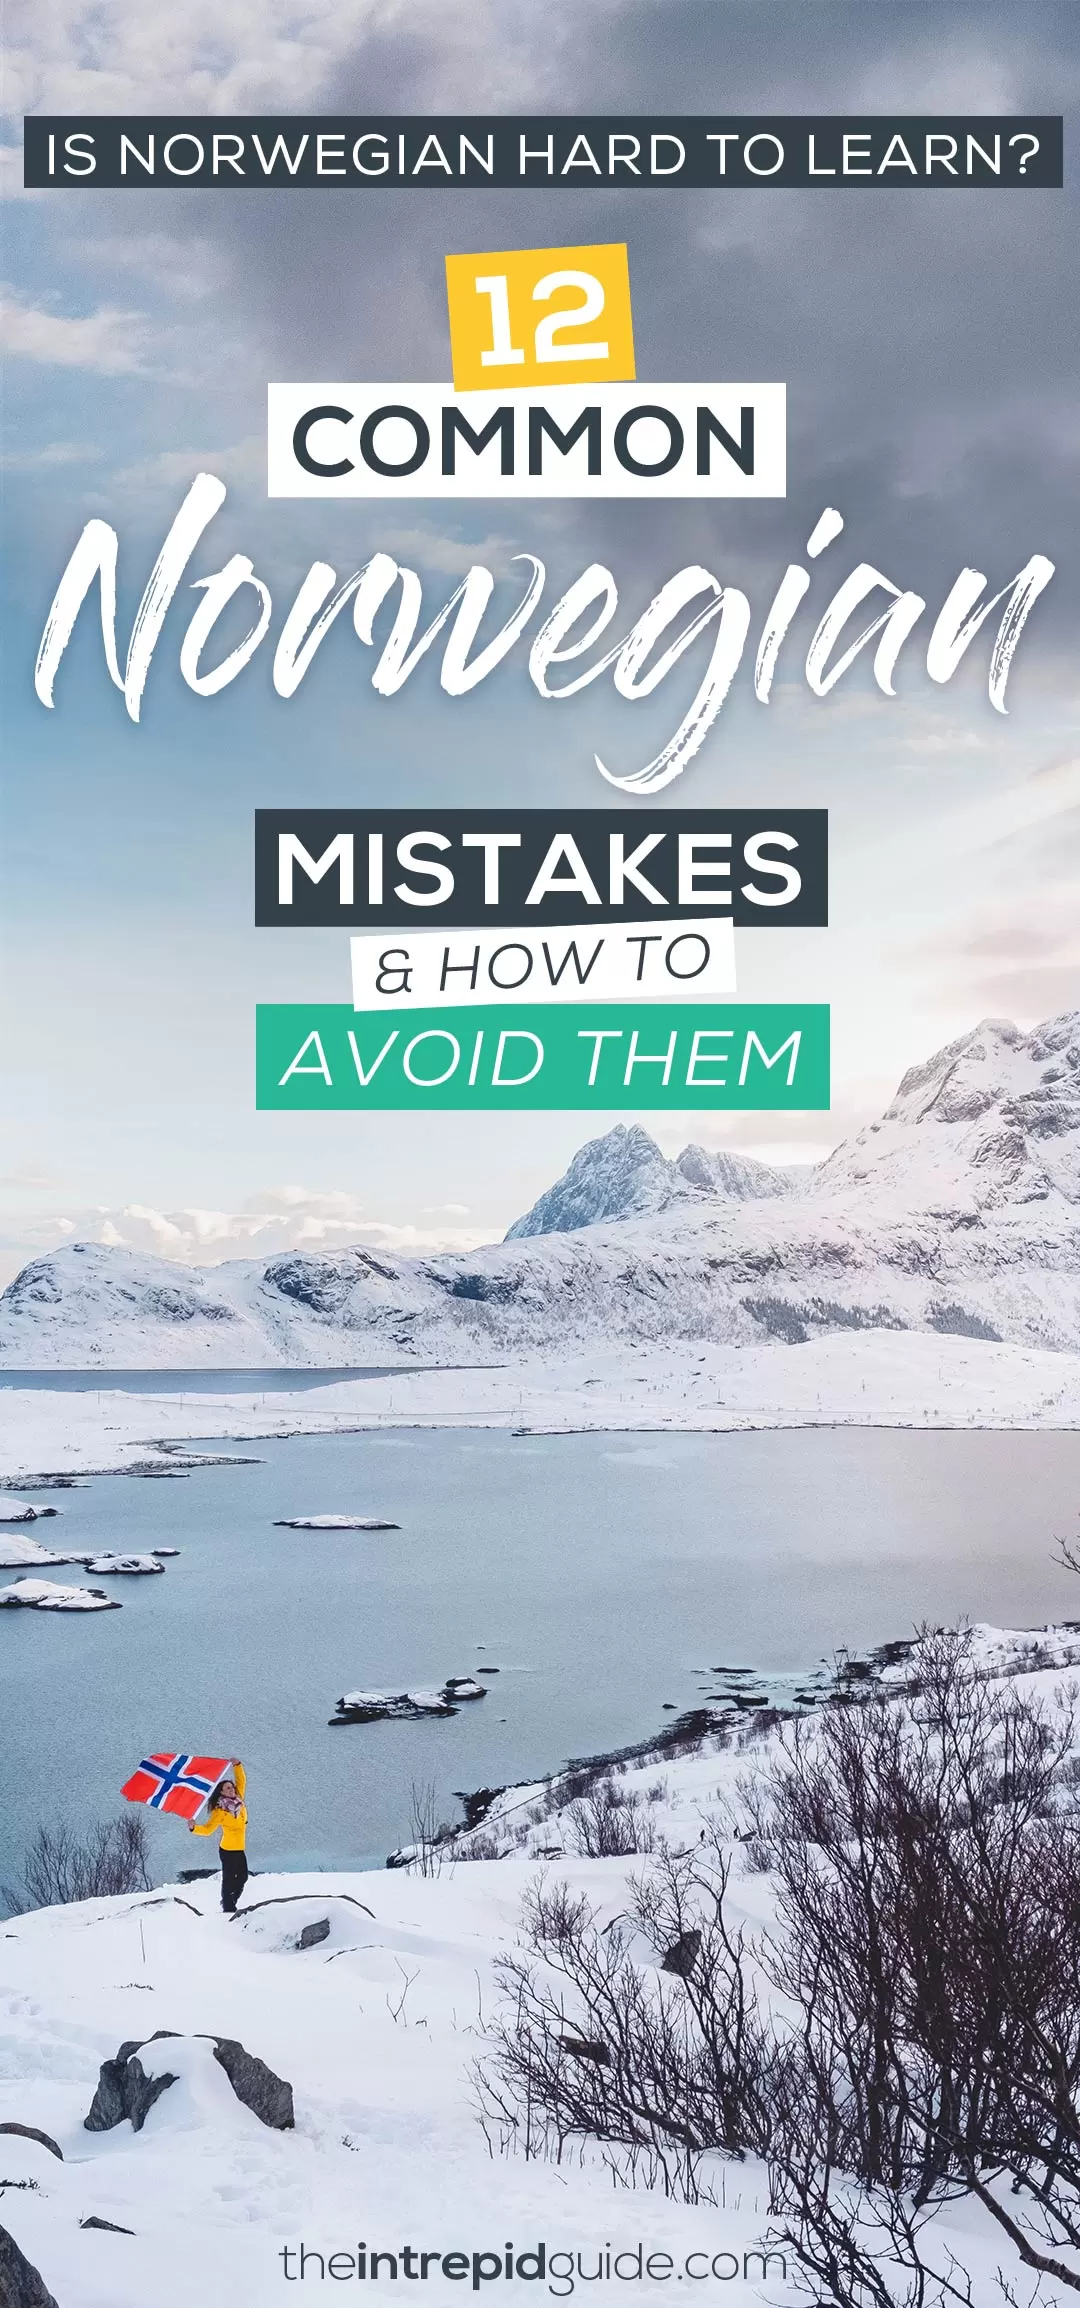 Is Norwegian Hard to Learn? 12 Common Norwegian Mistakes and How to Avoid Them